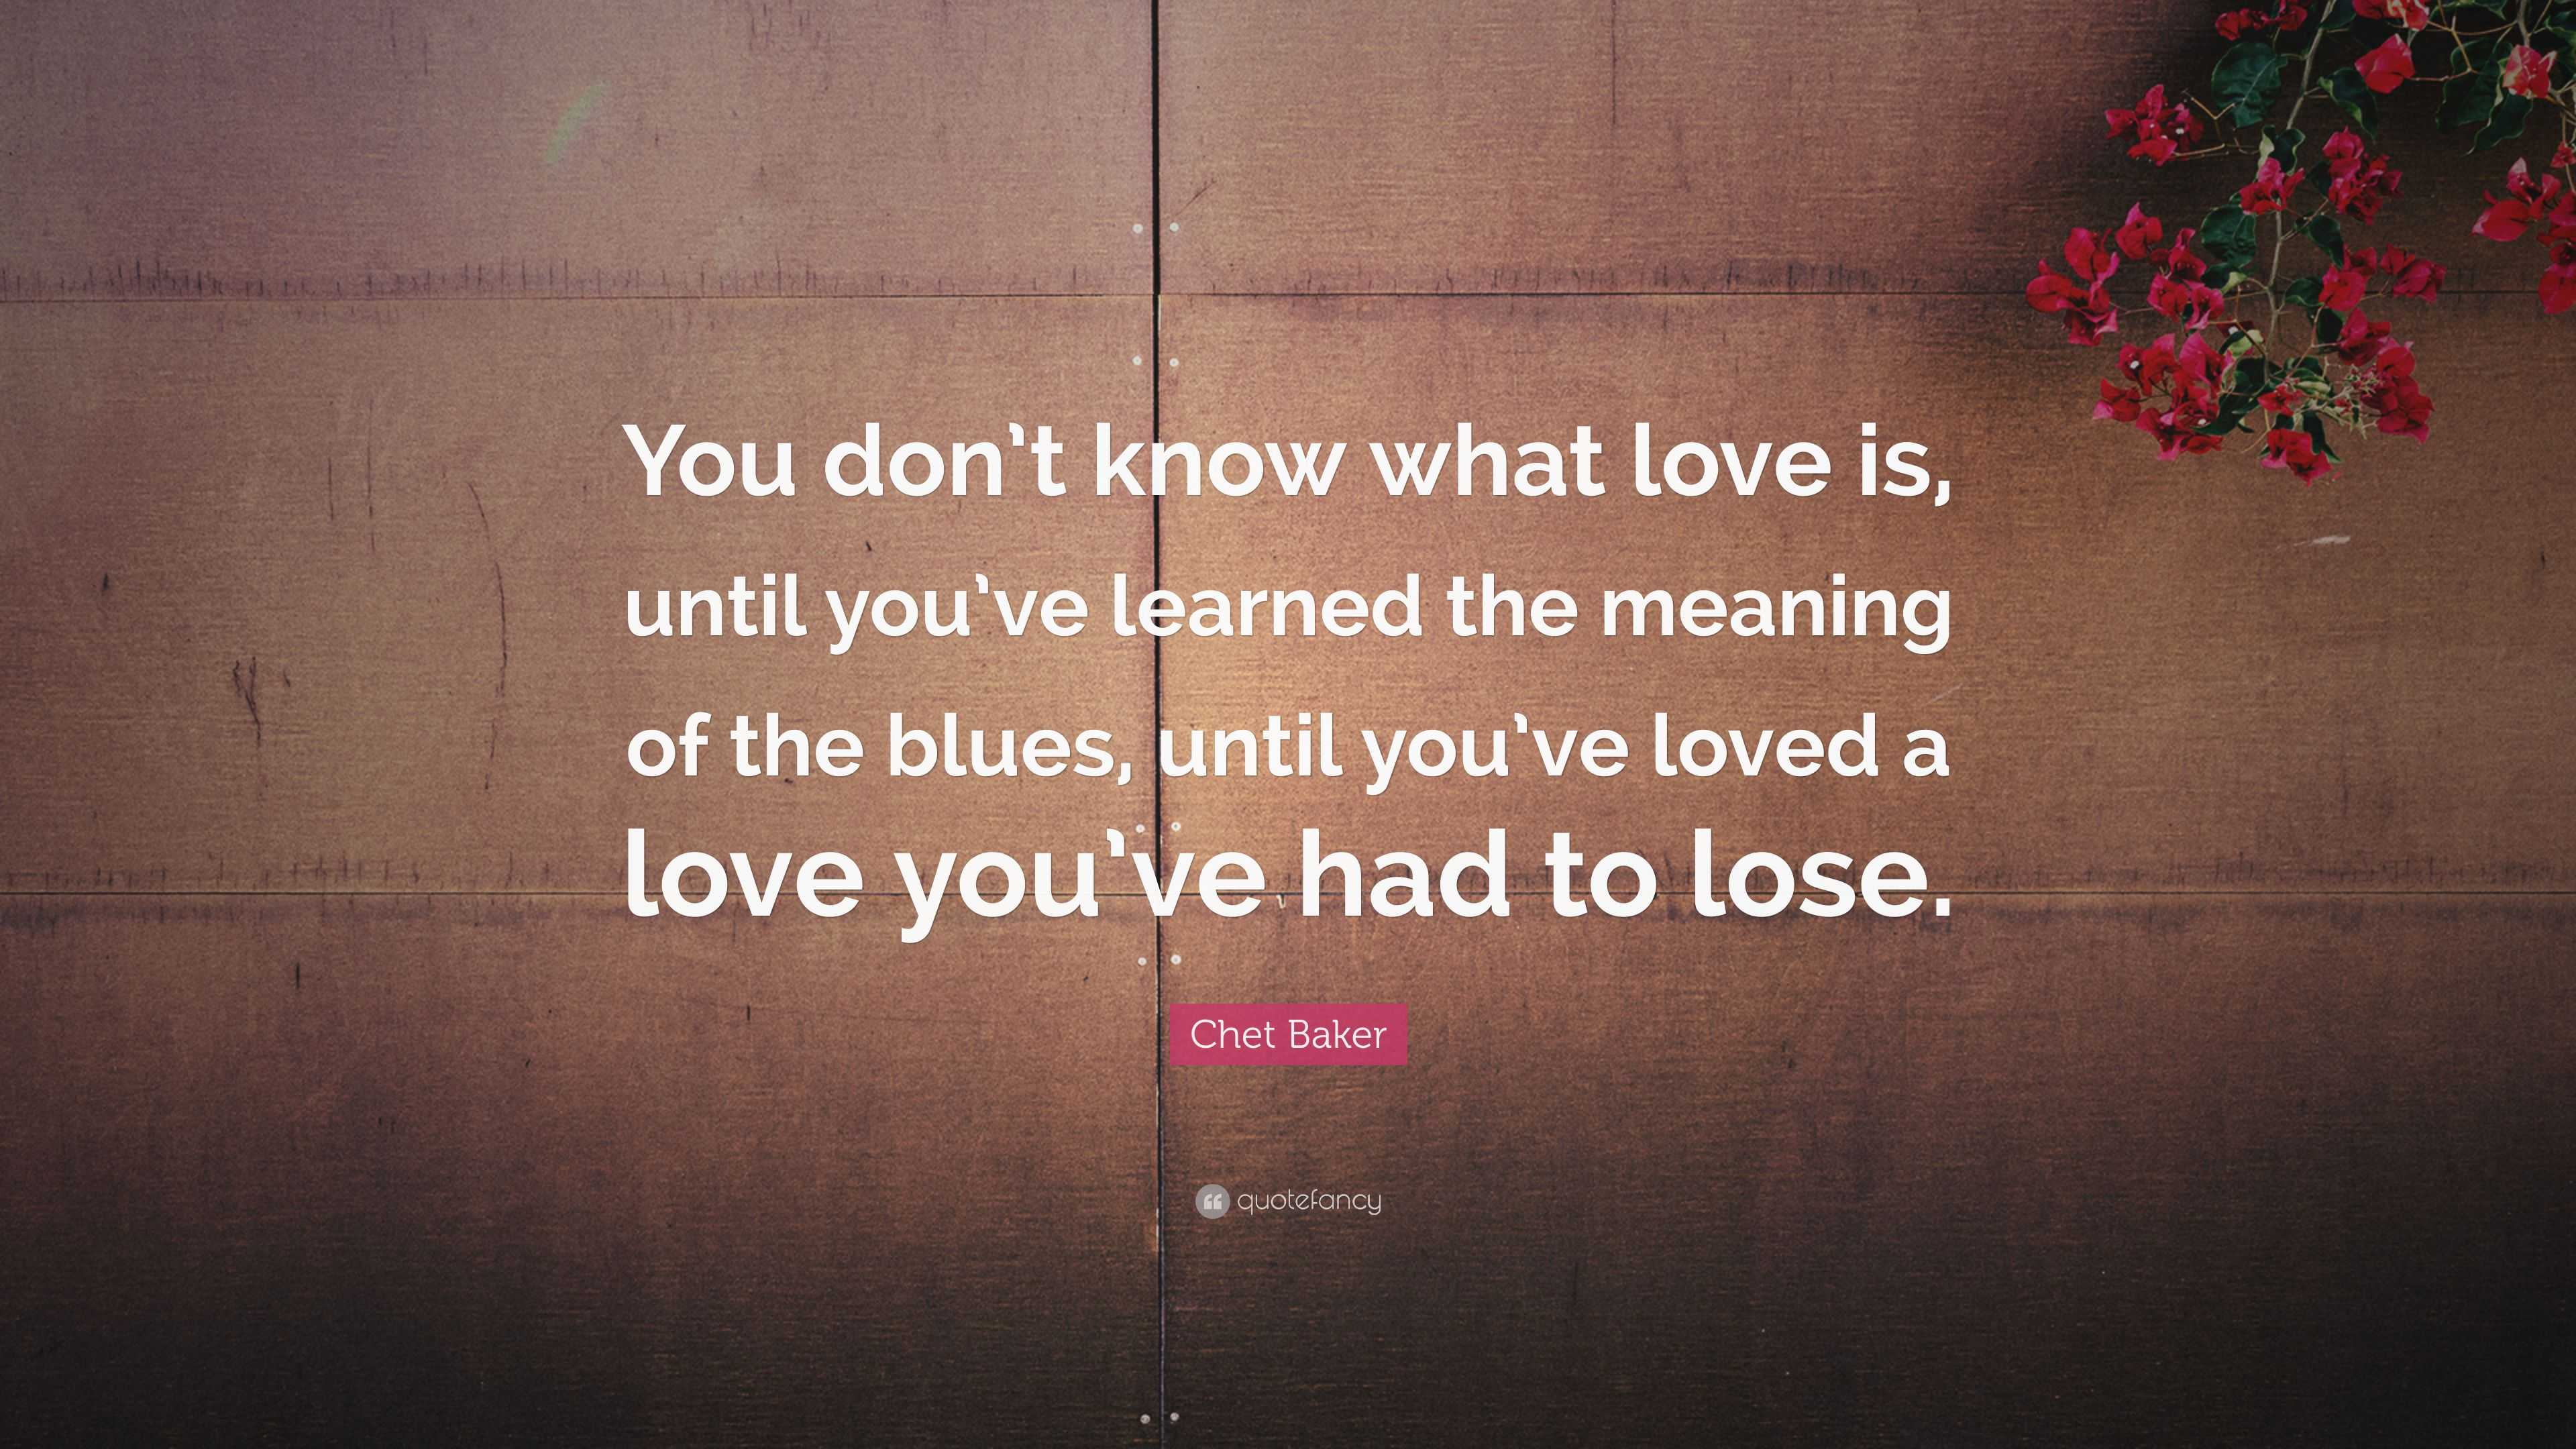 Chet Baker Quote You Don T Know What Love Is Until You Ve Learned The Meaning Of The Blues Until You Ve Loved A Love You Ve Had To Lose